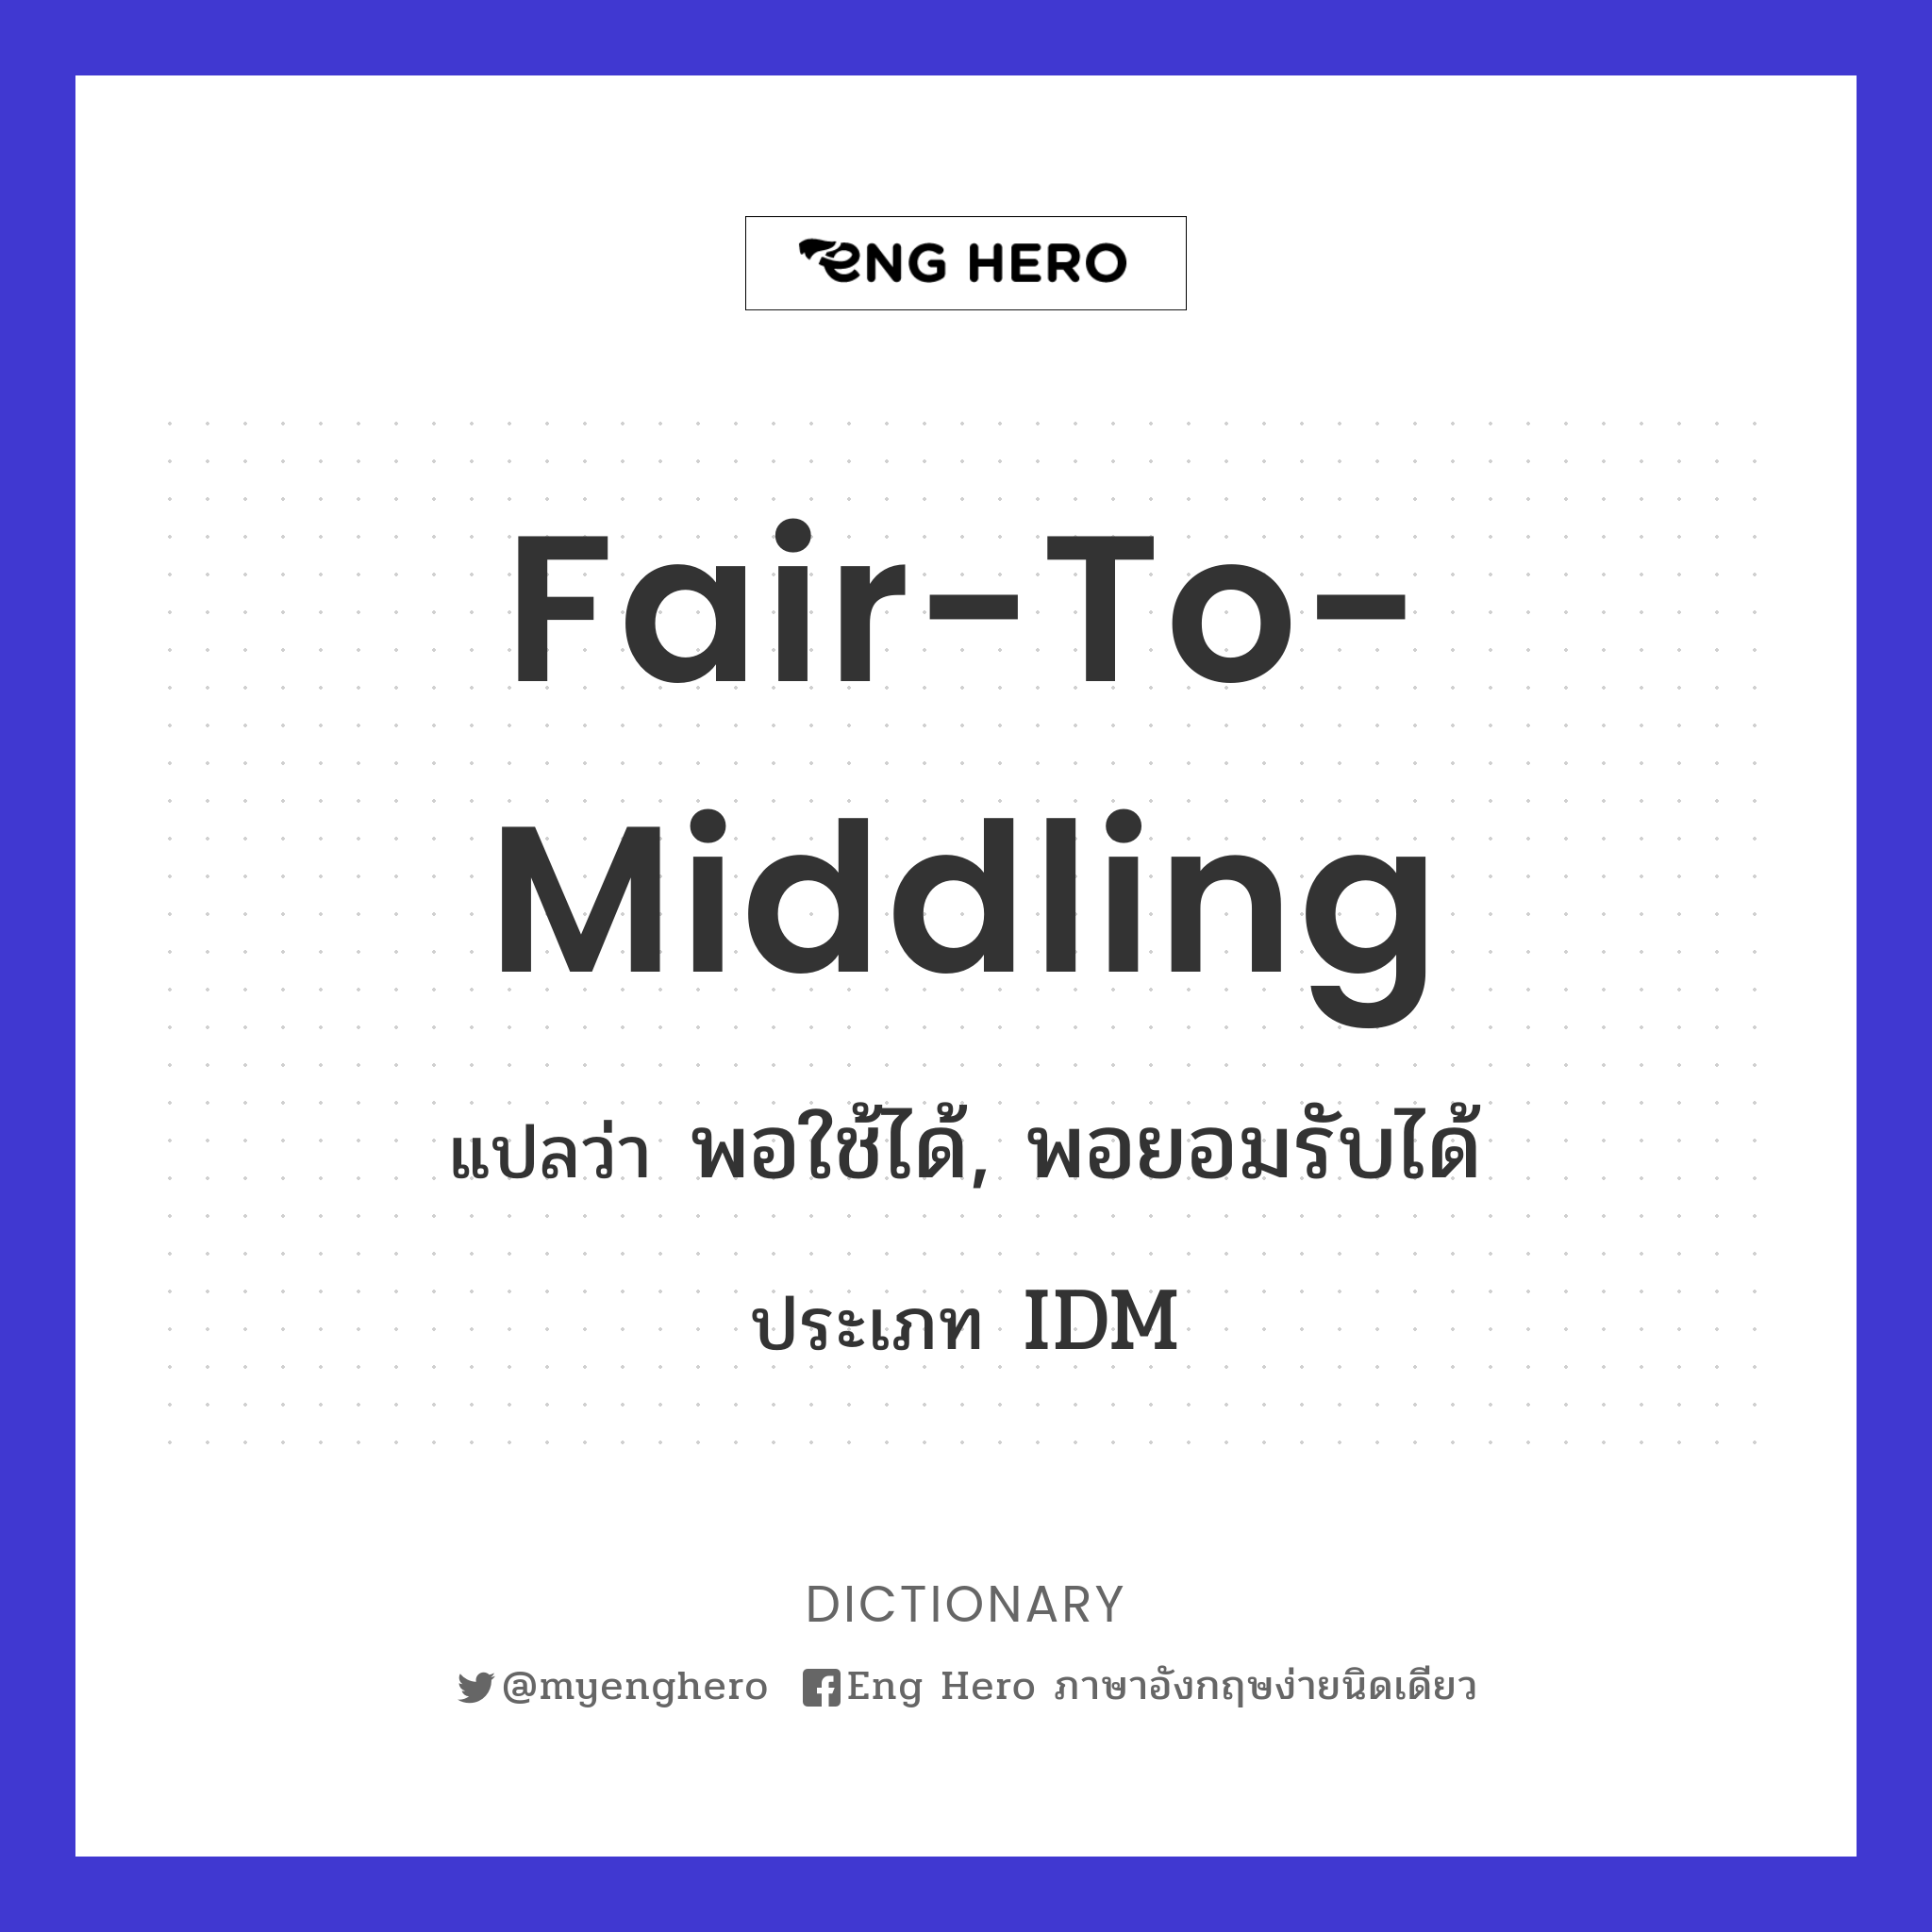 fair-to-middling